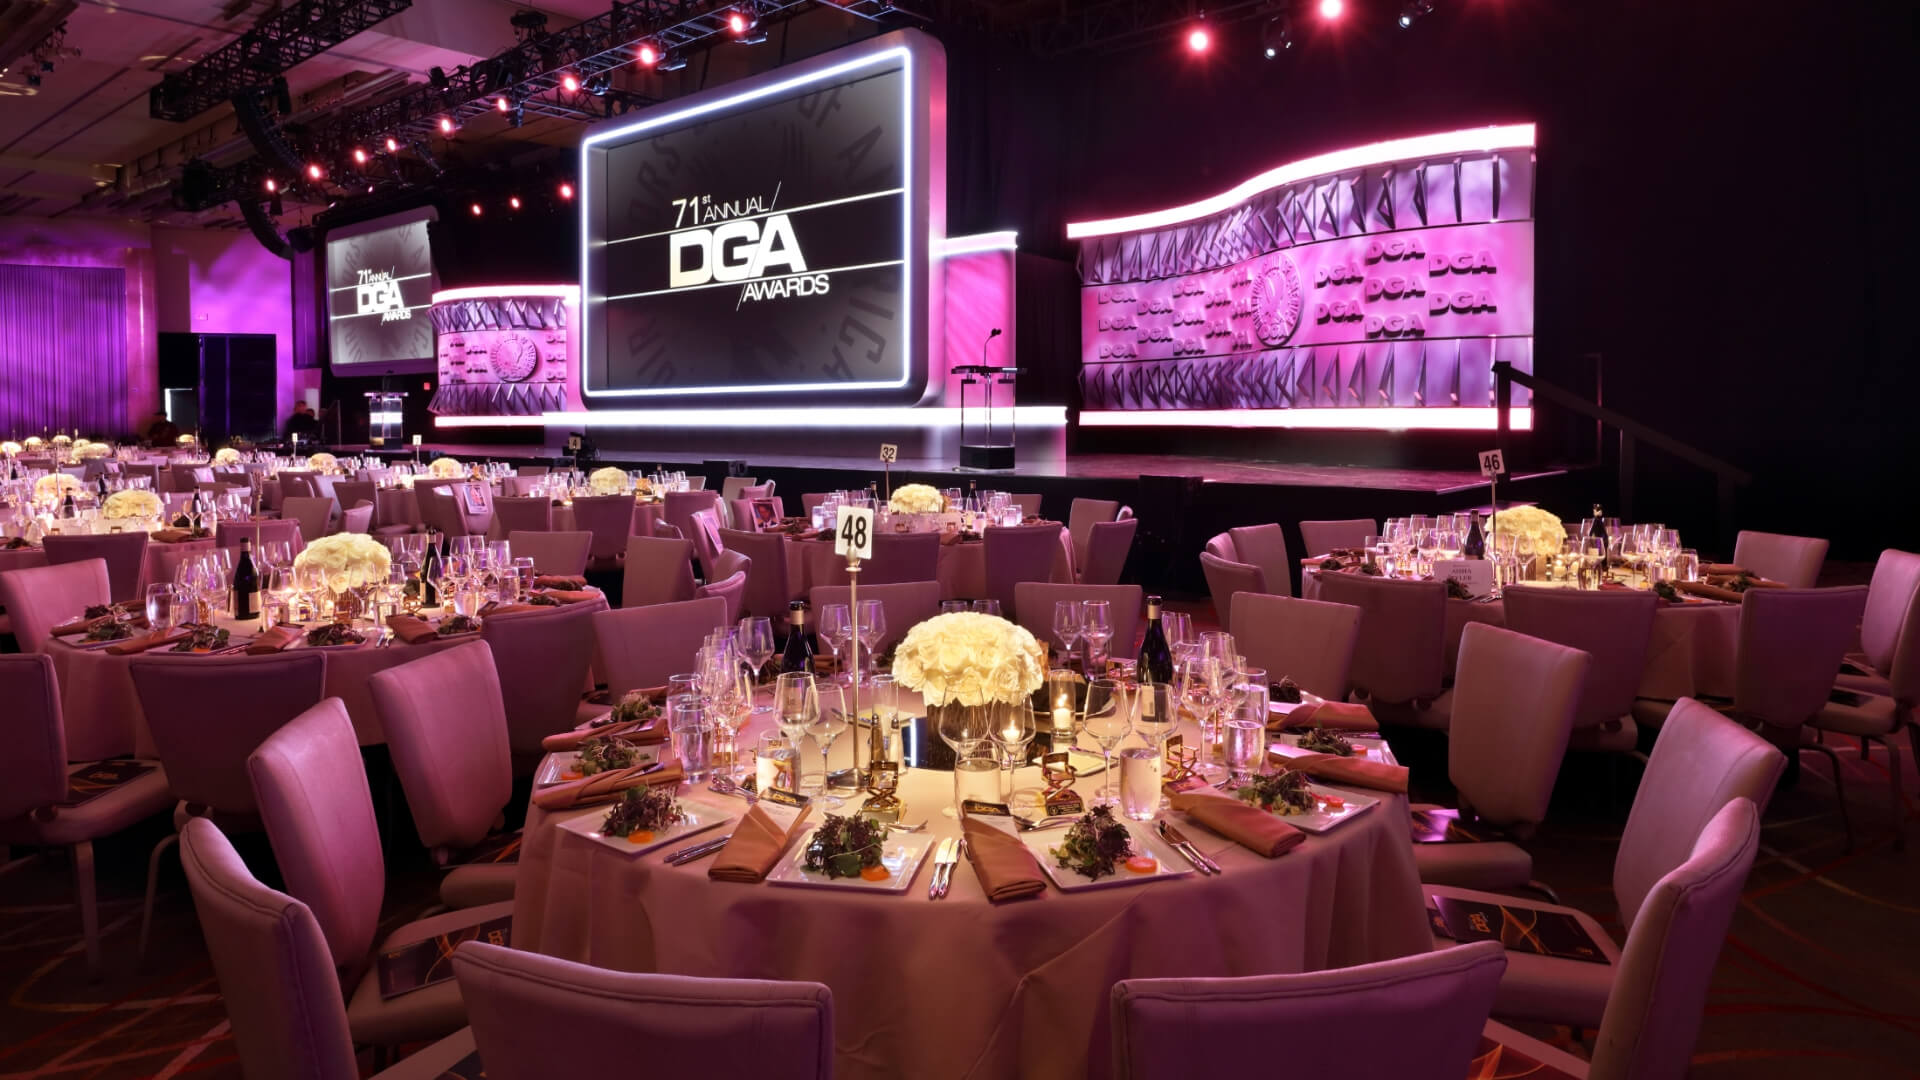 DGA Awards Event Production Los Angeles JG2 Collective